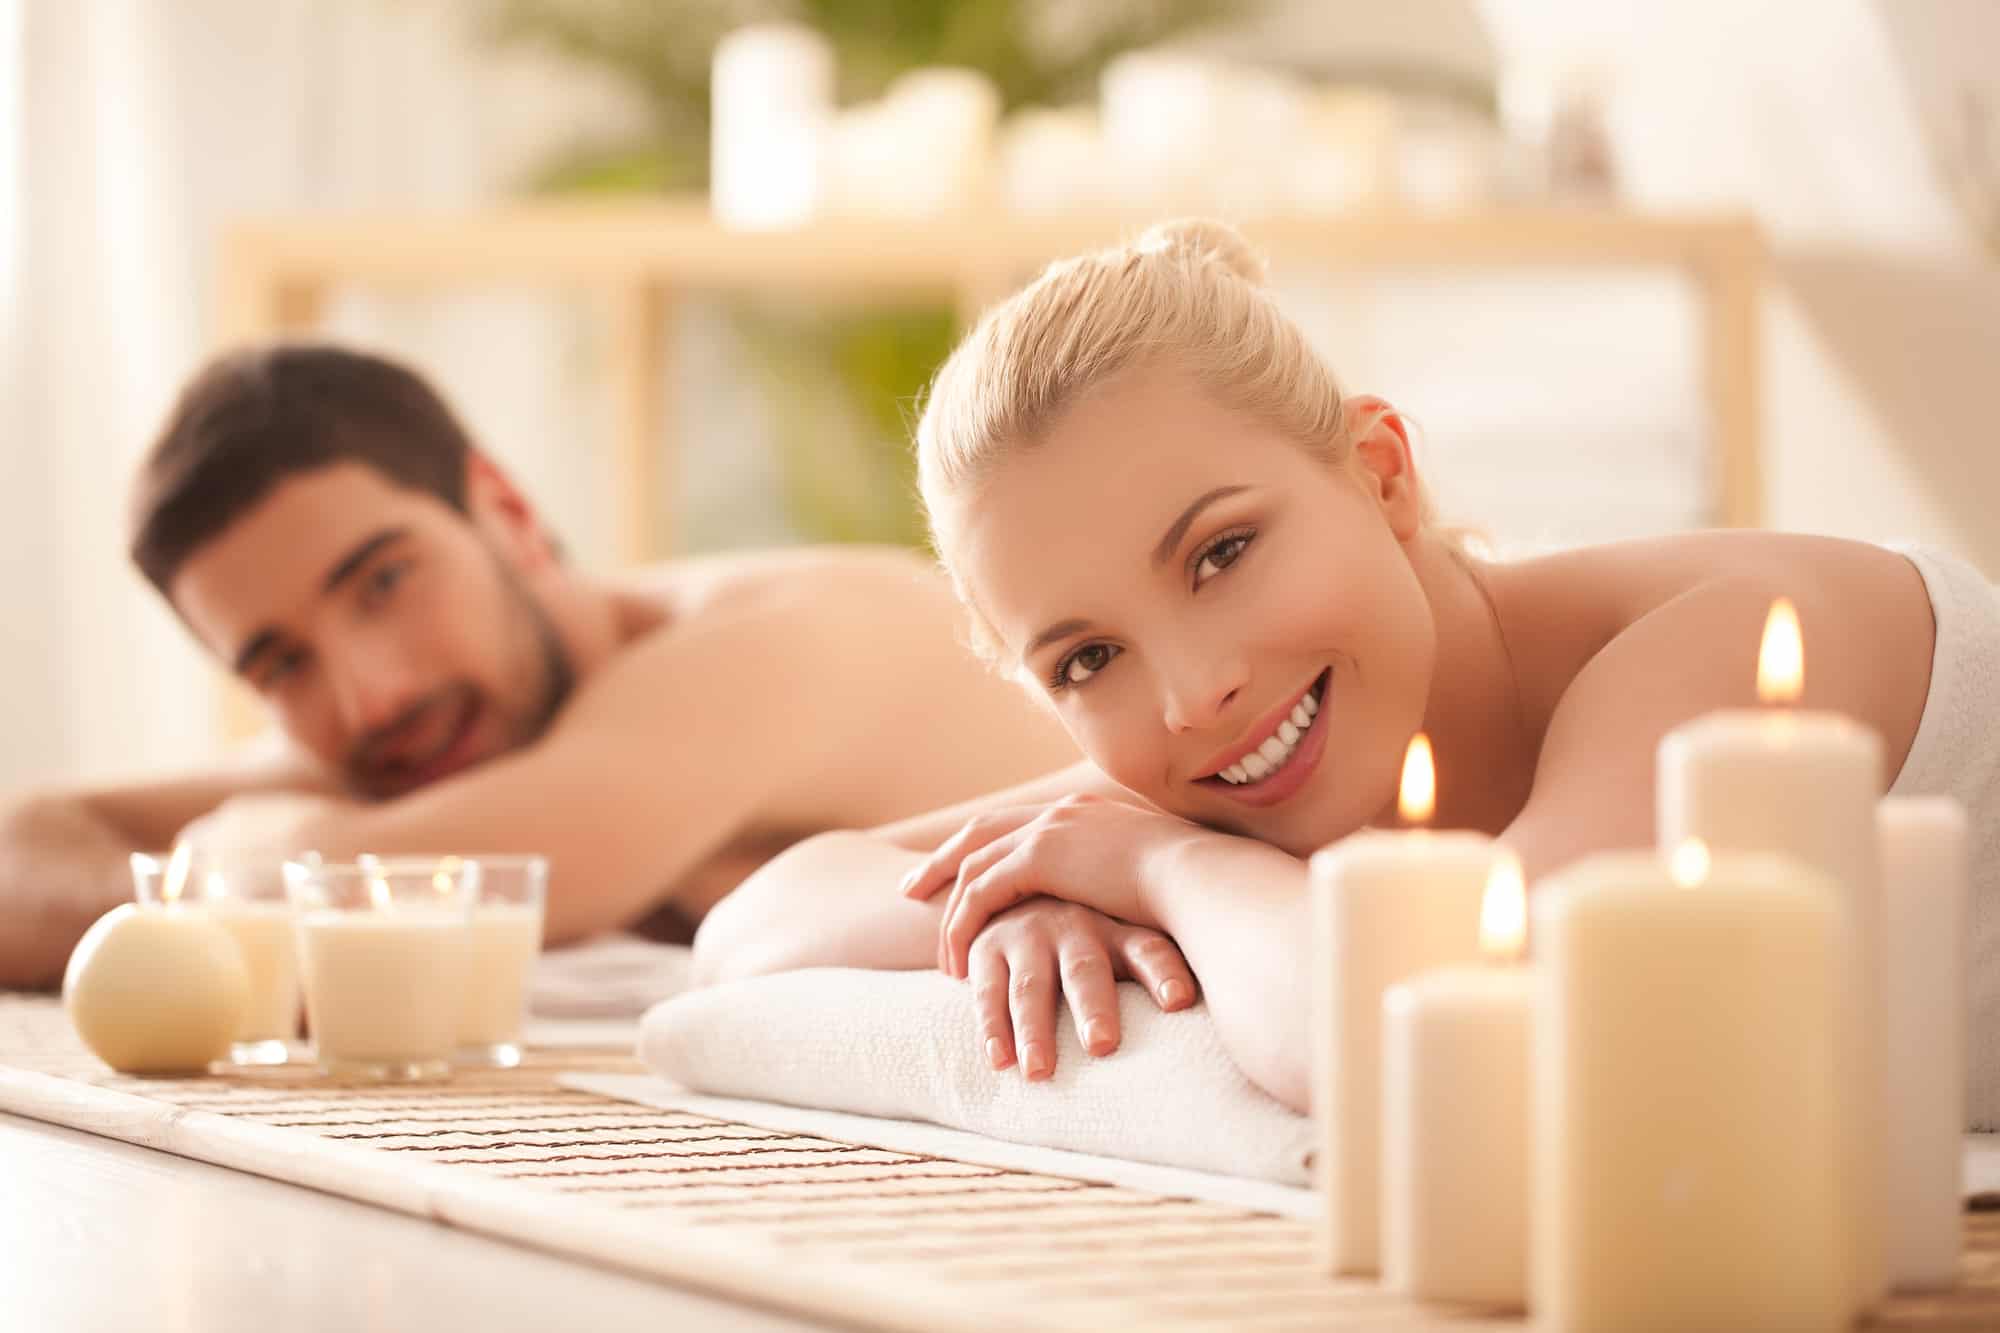 Feel closer with an effective couple’s massage